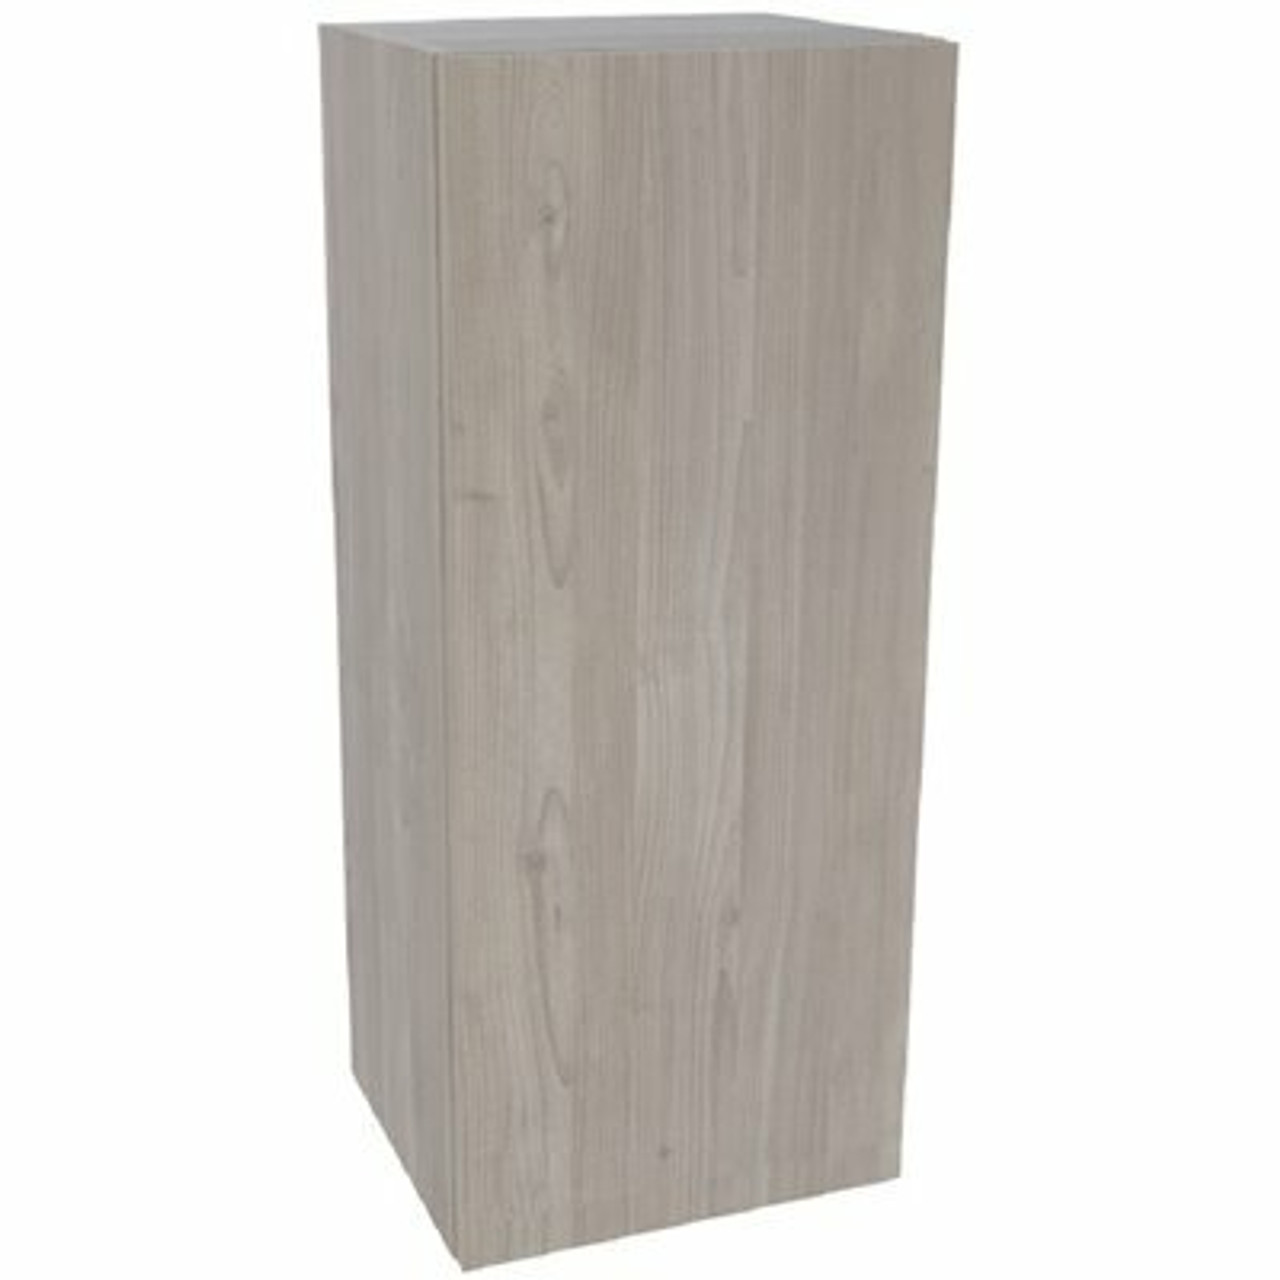 Cambridge Ready To Assemble Threespine 18 In. X 42 In. X 12 In. Stock Wall Cabinet In Grey Nordic